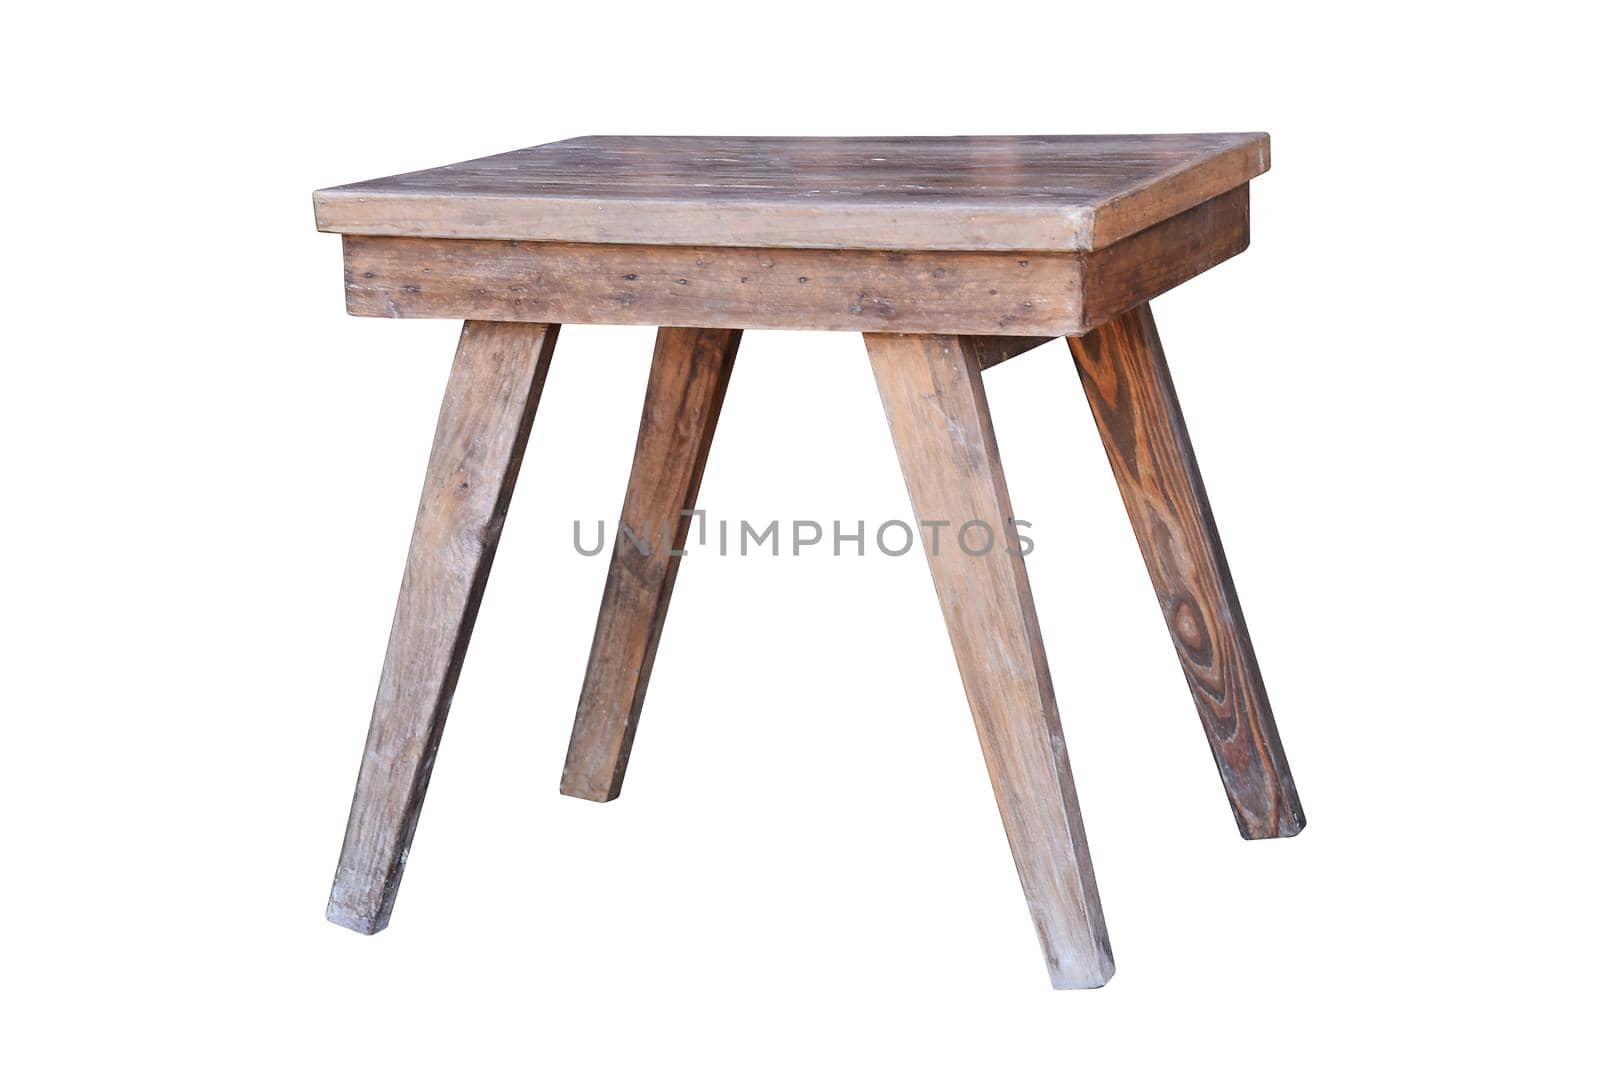 Old wooden table isolated on white background. by NuwatPhoto